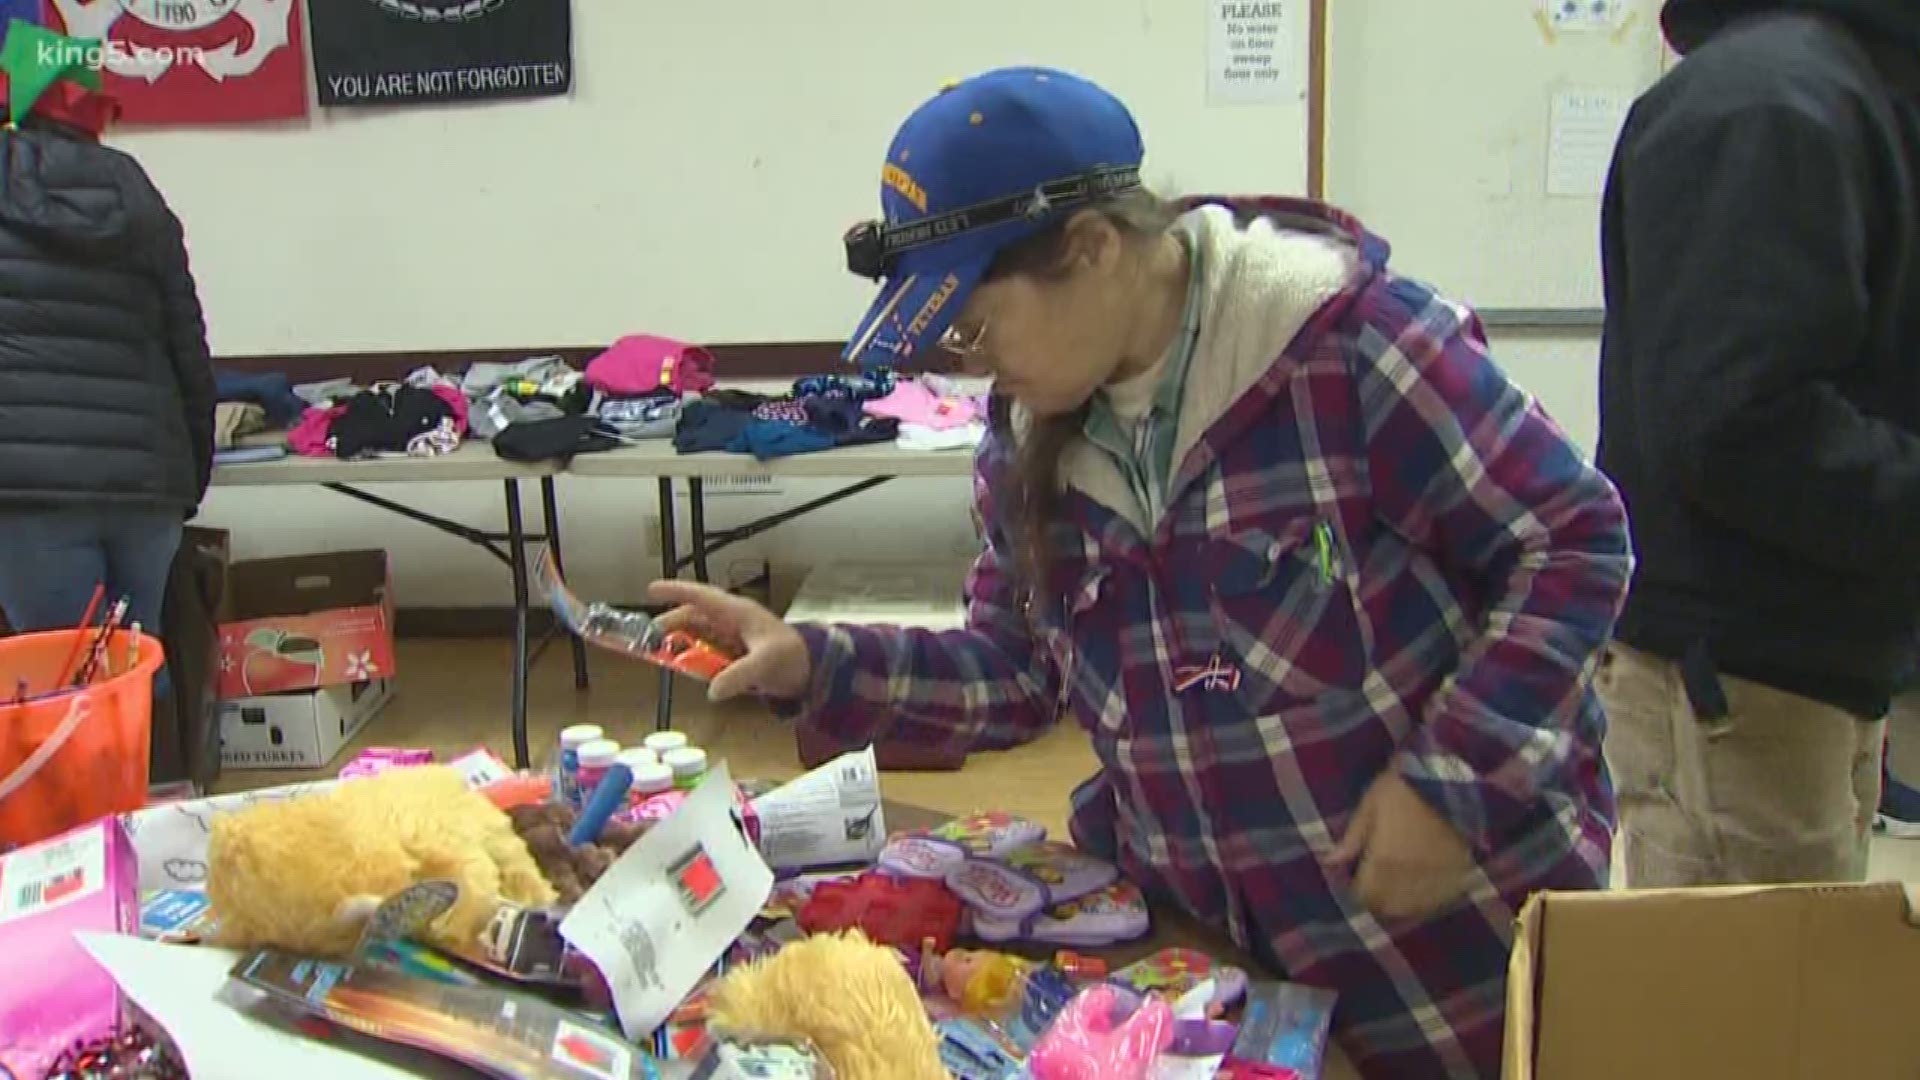 It was an emotional Saturday in Port Orchard as hundreds lined up for the South Kitsap Helpline's Holiday giveaway. The event allows families who are struggling to pick out Christmas gifts for their children.